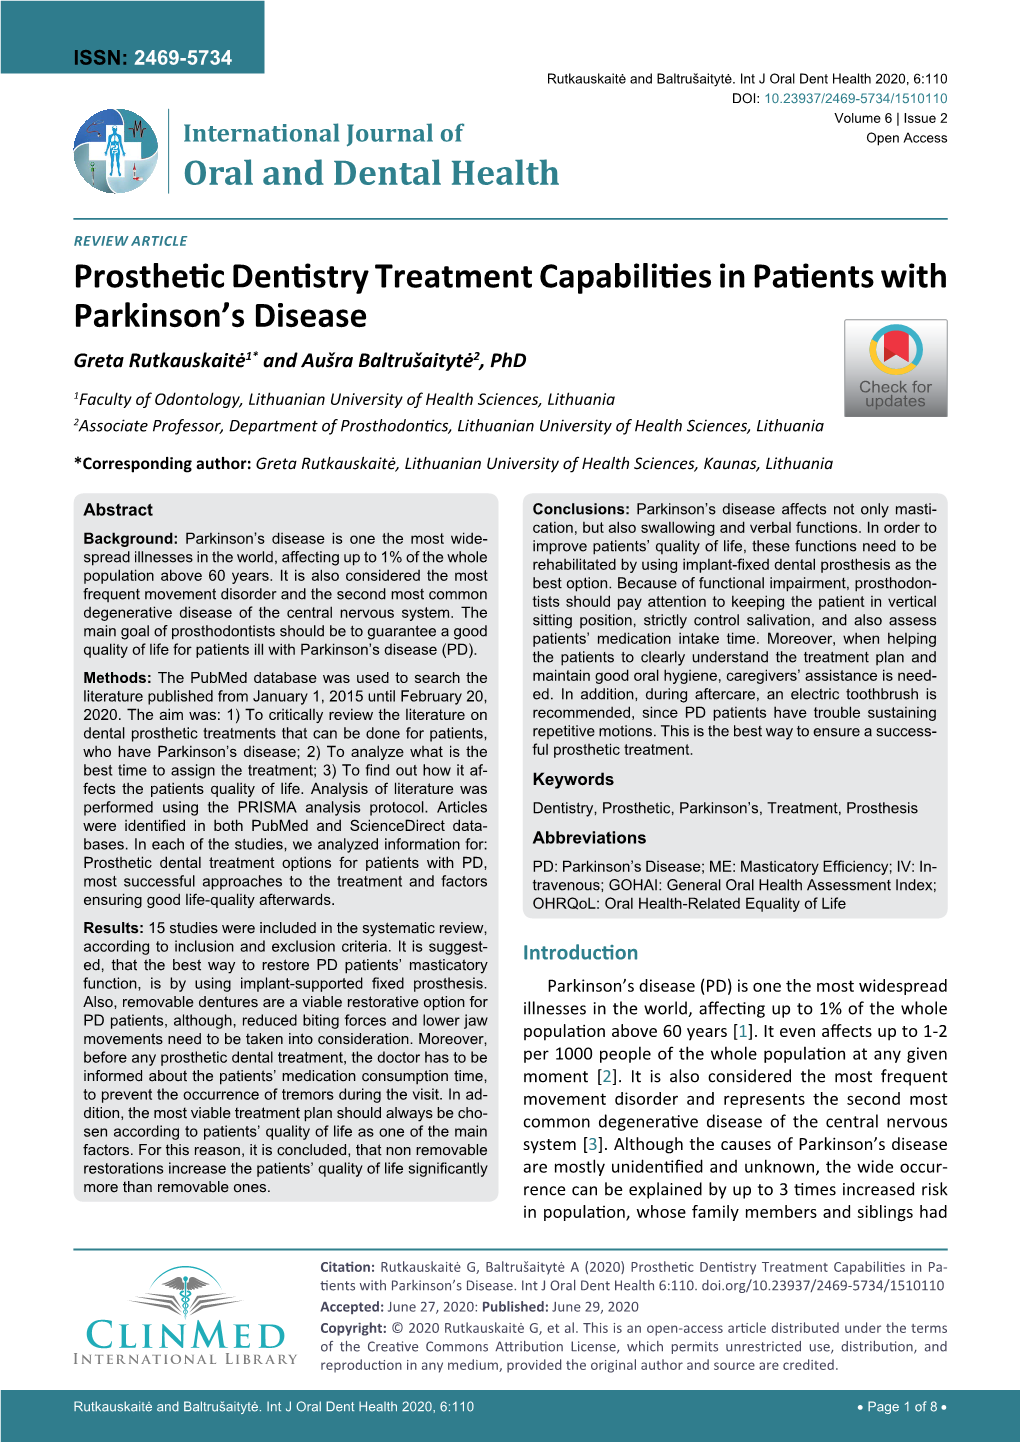 Prosthetic Dentistry Treatment Capabilities in Patients With